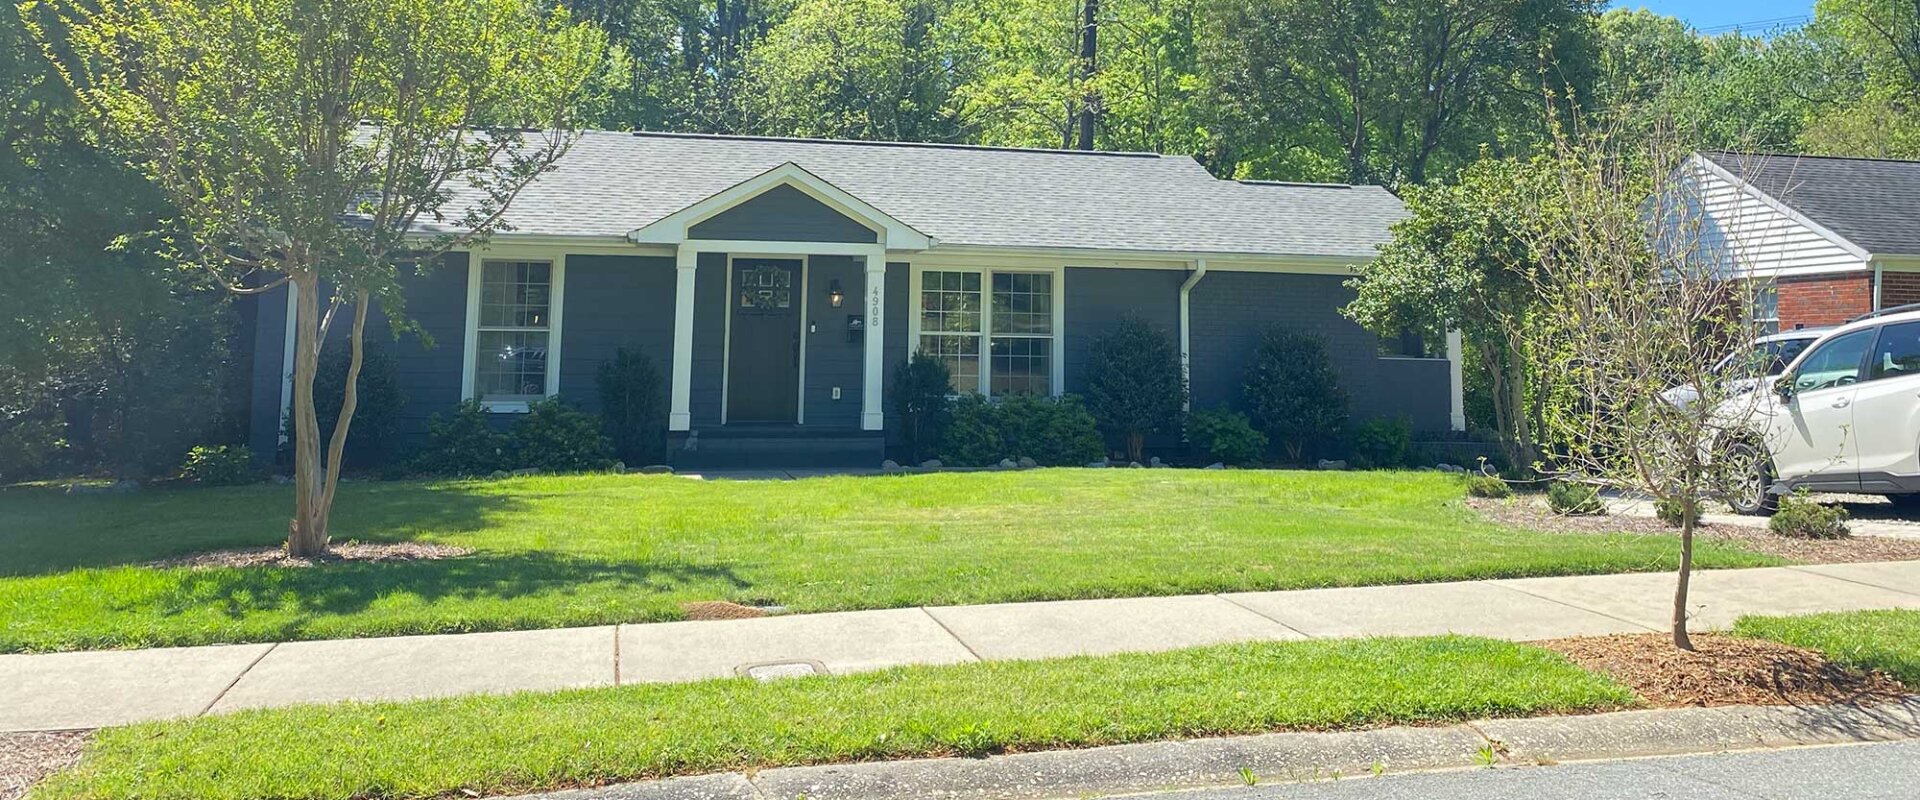 Sell My House Fast In Matthews, NC